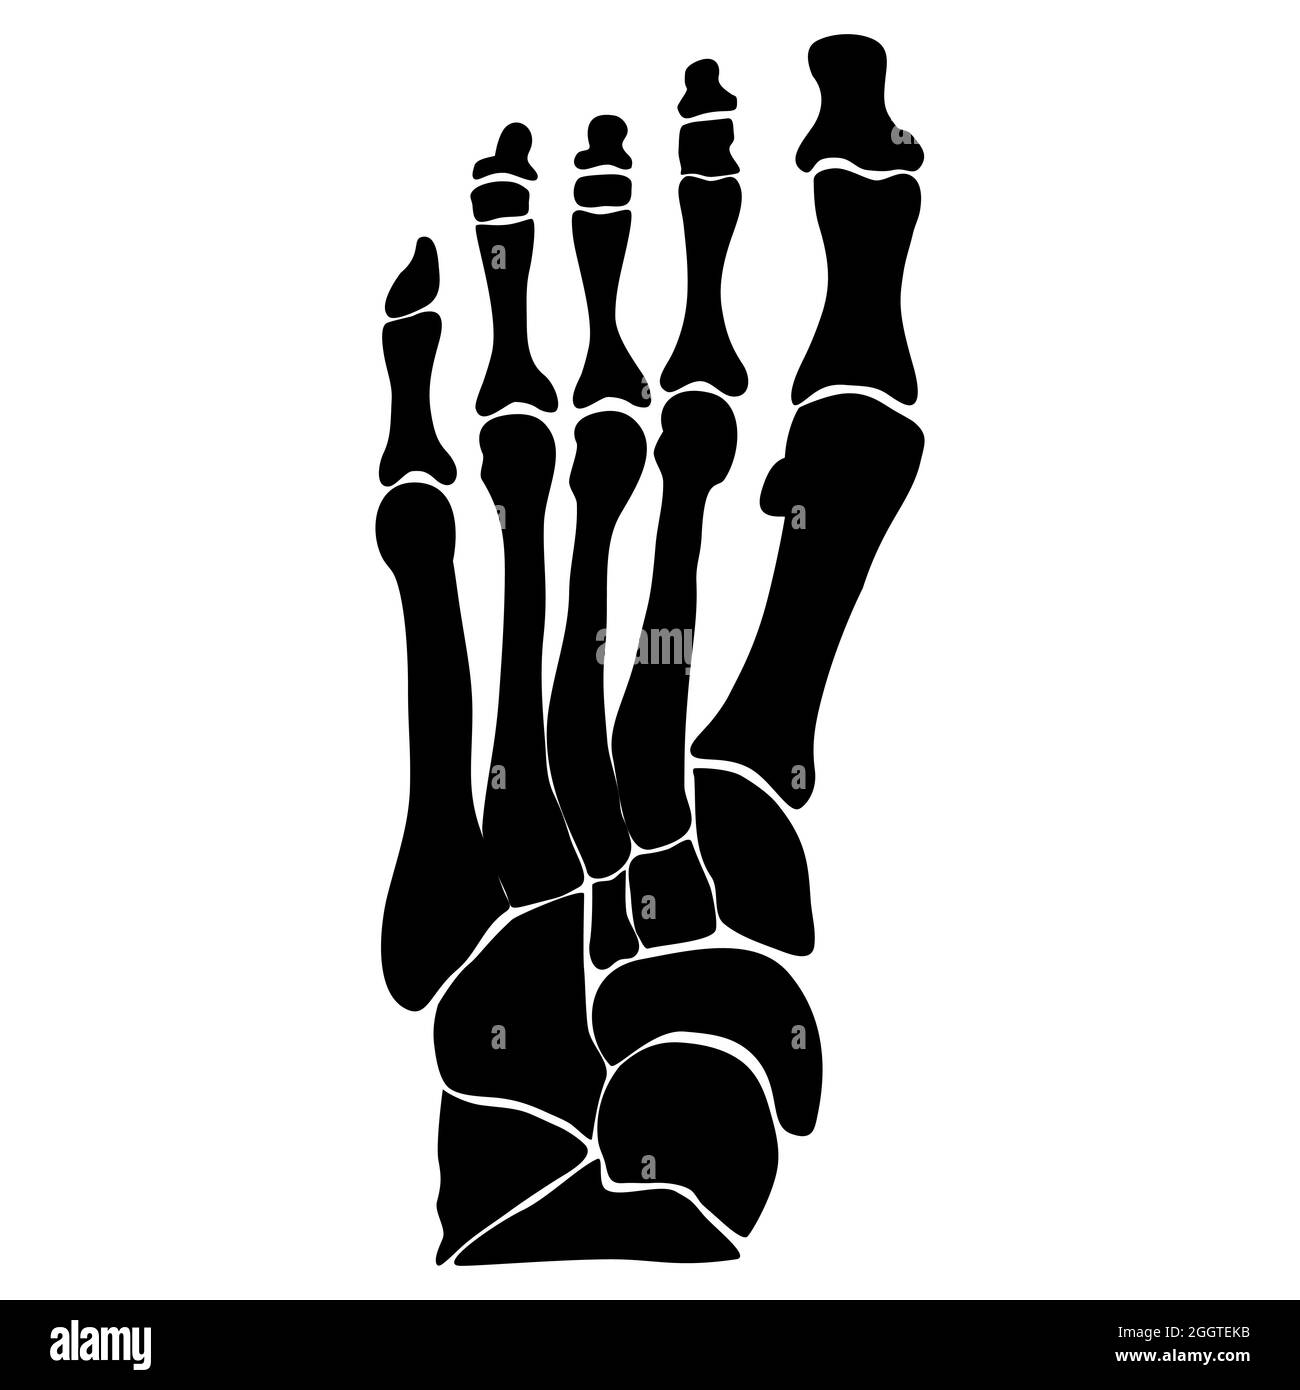 Anatomical structure of the bones of the foot. Black silhouette. Vector illustration. Stock Vector